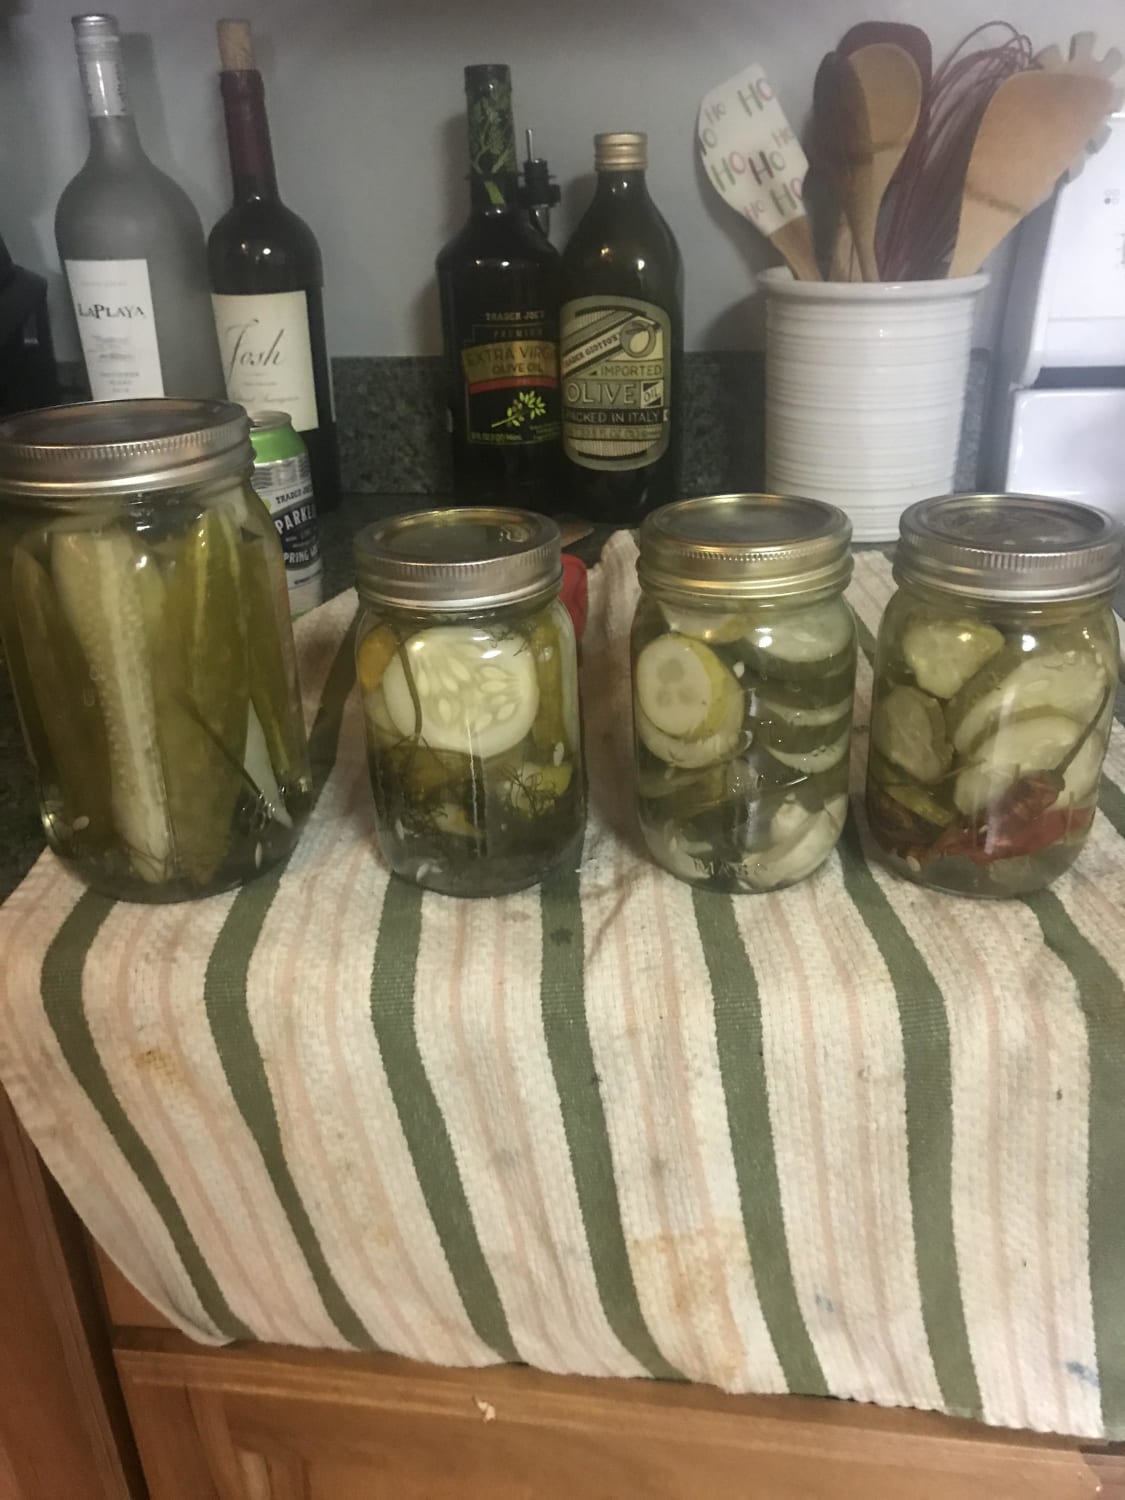 Made some pickles today, left to right; dill spears, dill chips, dill and garlic chips, dill and chili pepper chips. 100% homestead grown.